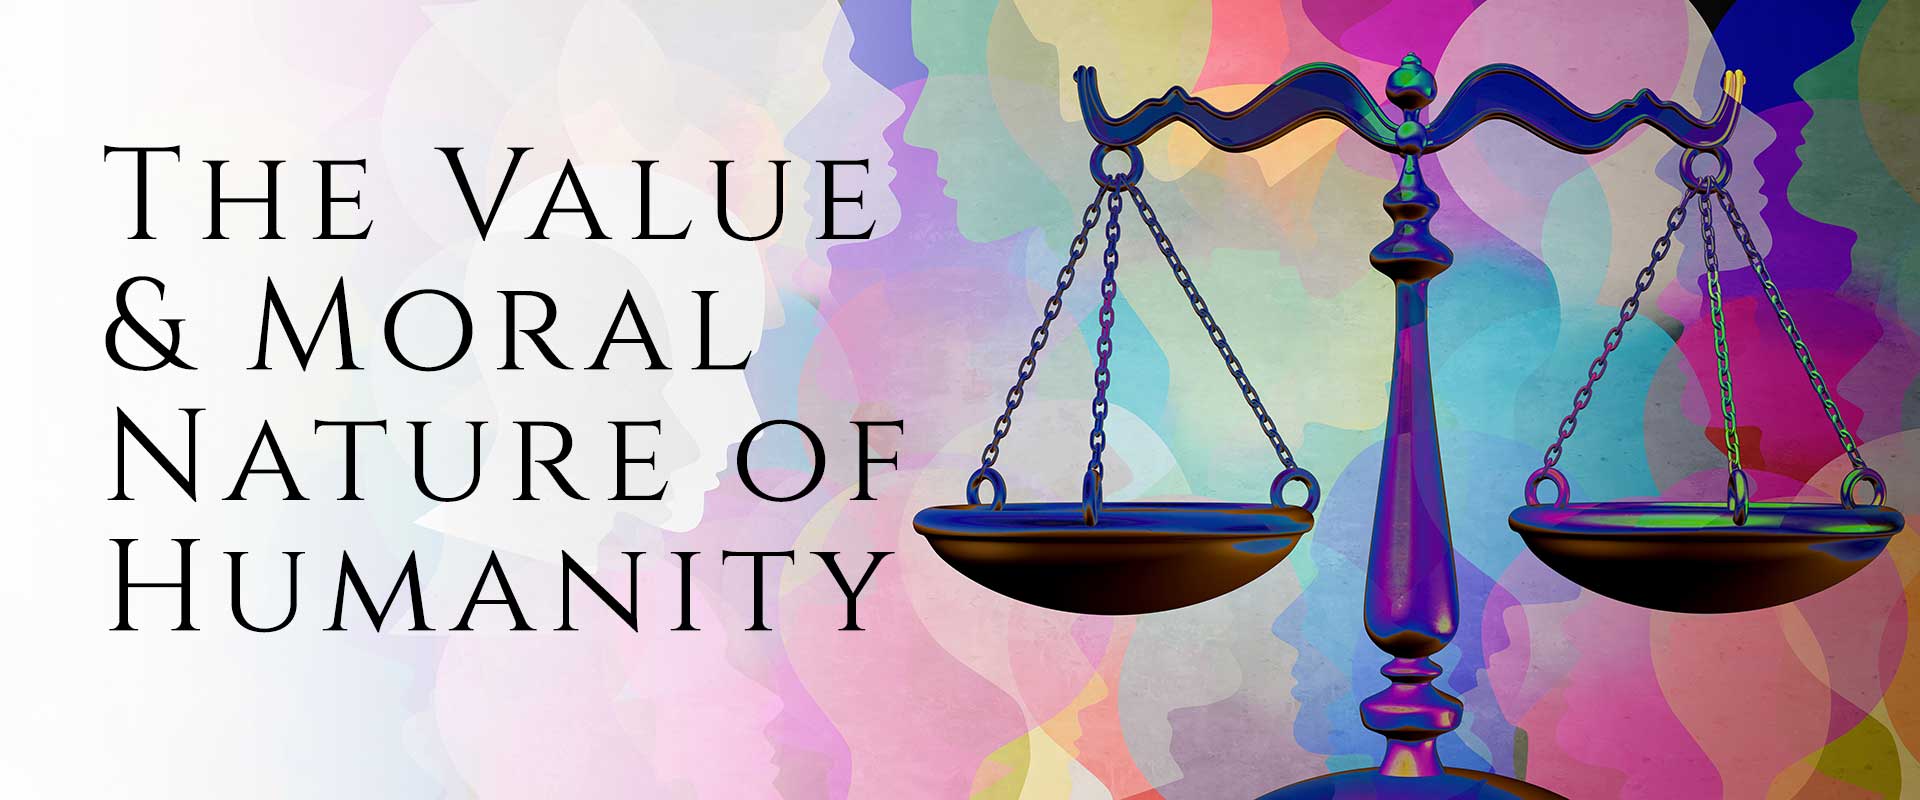 Volume V: The Value & Moral Nature of Humanity